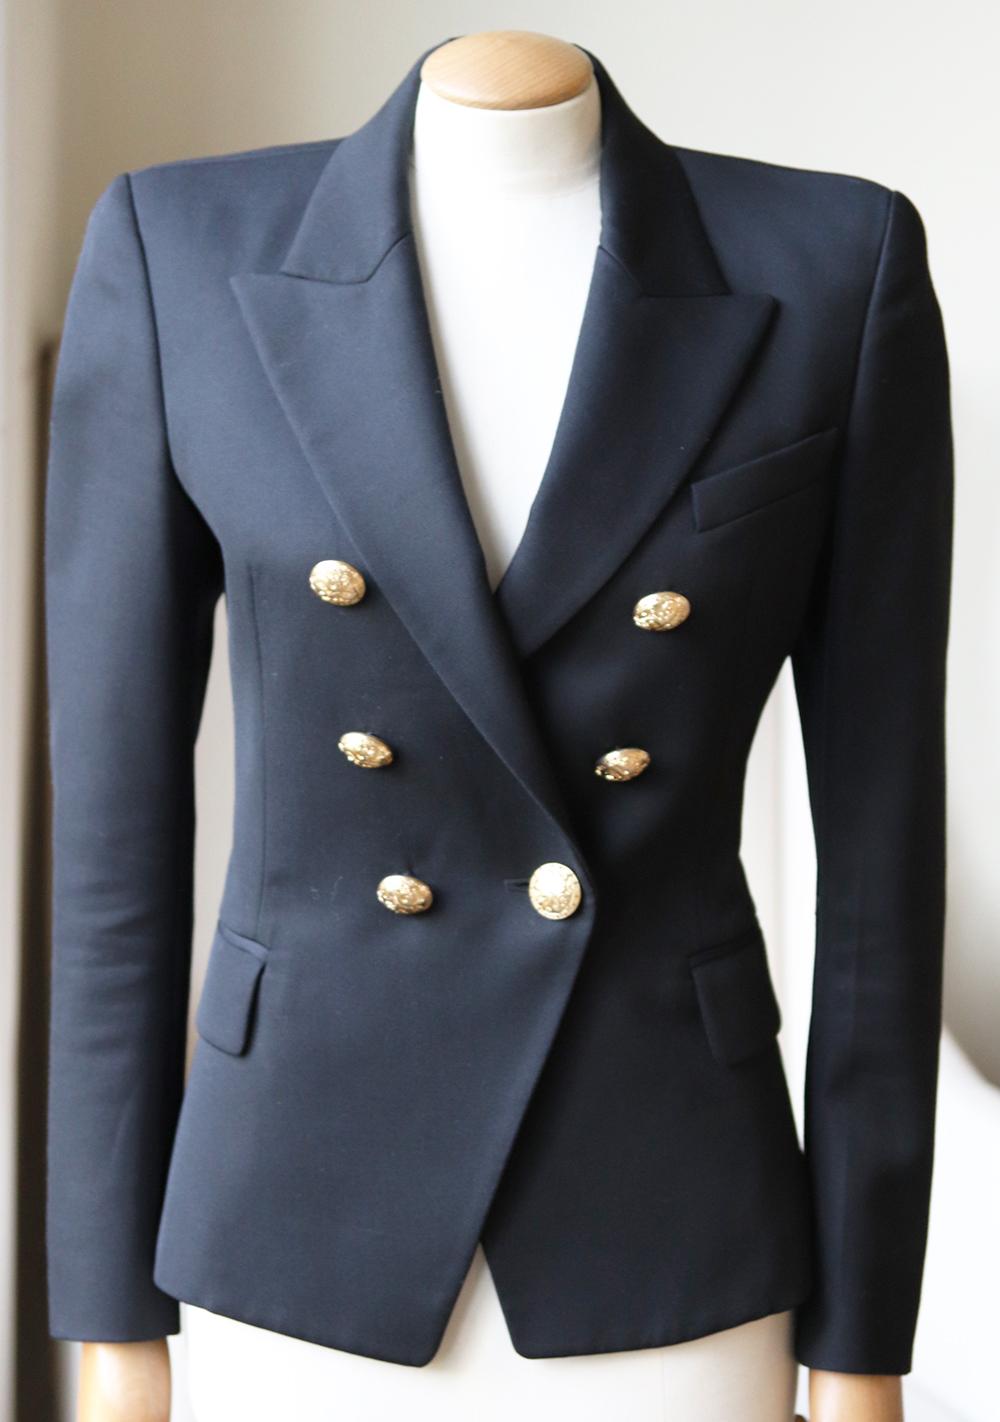 Balmain's sharply tailored blazer has snake-embossed gold buttons that emphasize the narrow structure of the jacket.
It's cut for a slim fit from mid-weight wool-twill and lined for easy layering.
Black wool-twill.
Button fastening through